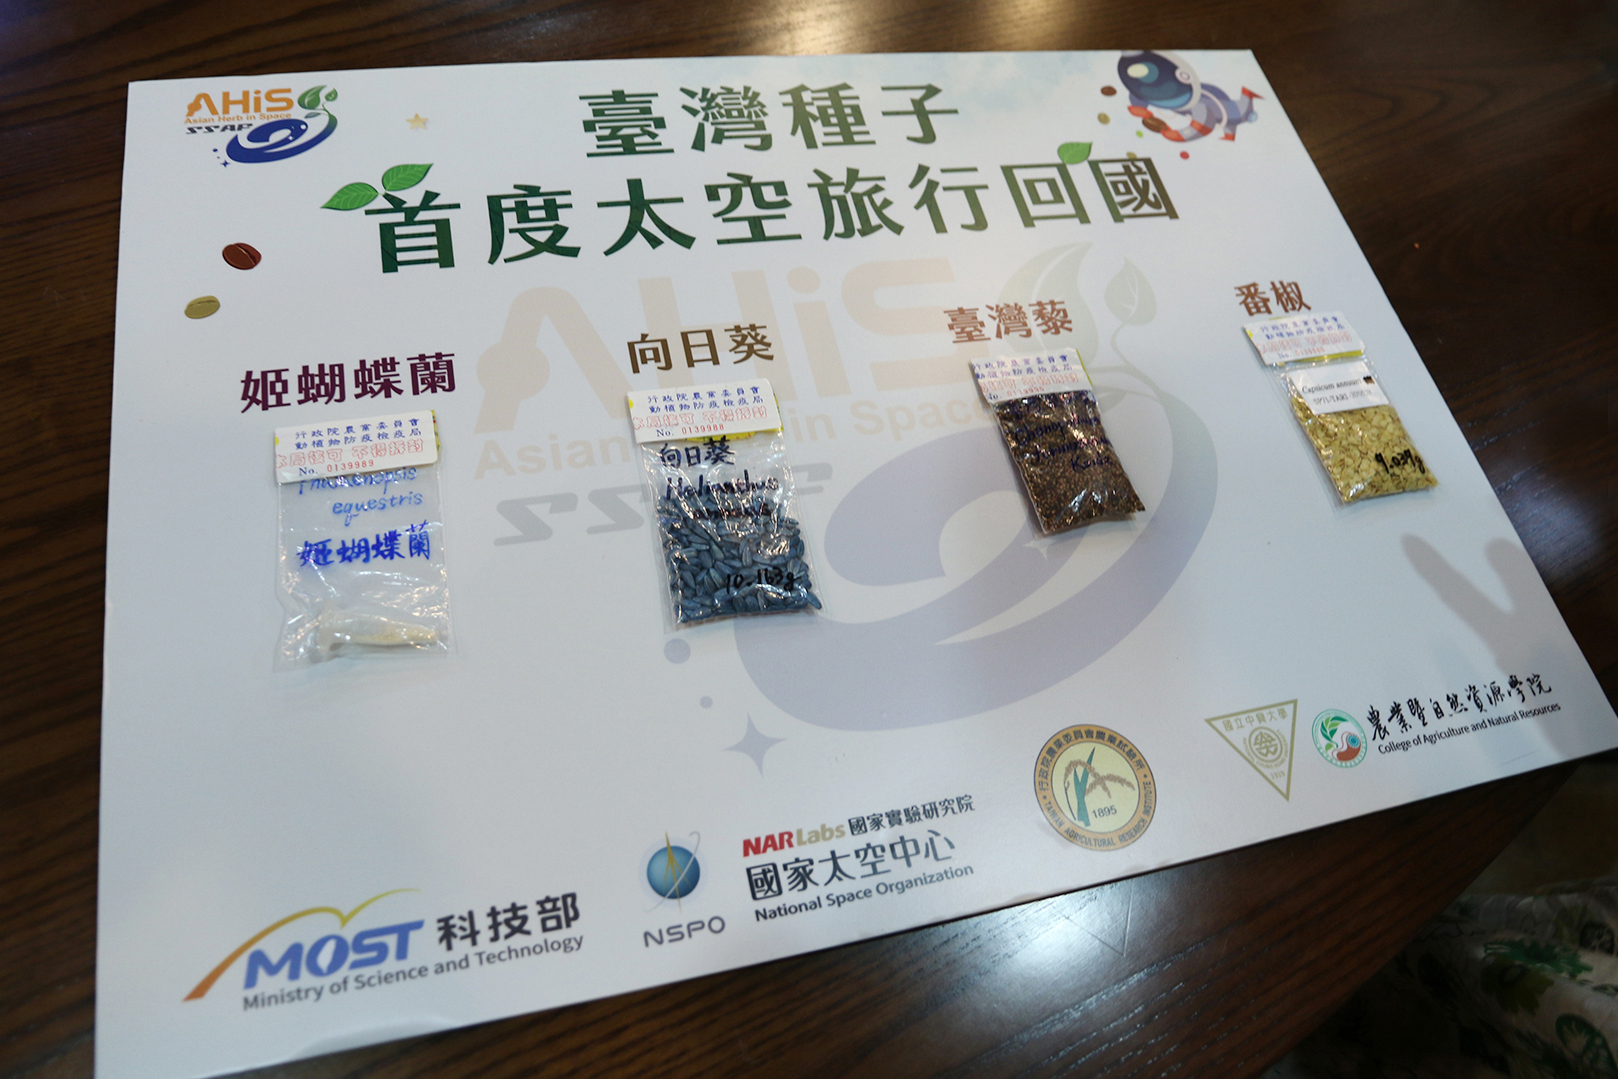 Space Traveled Seeds Arrived National Chung Hsing University on September 16